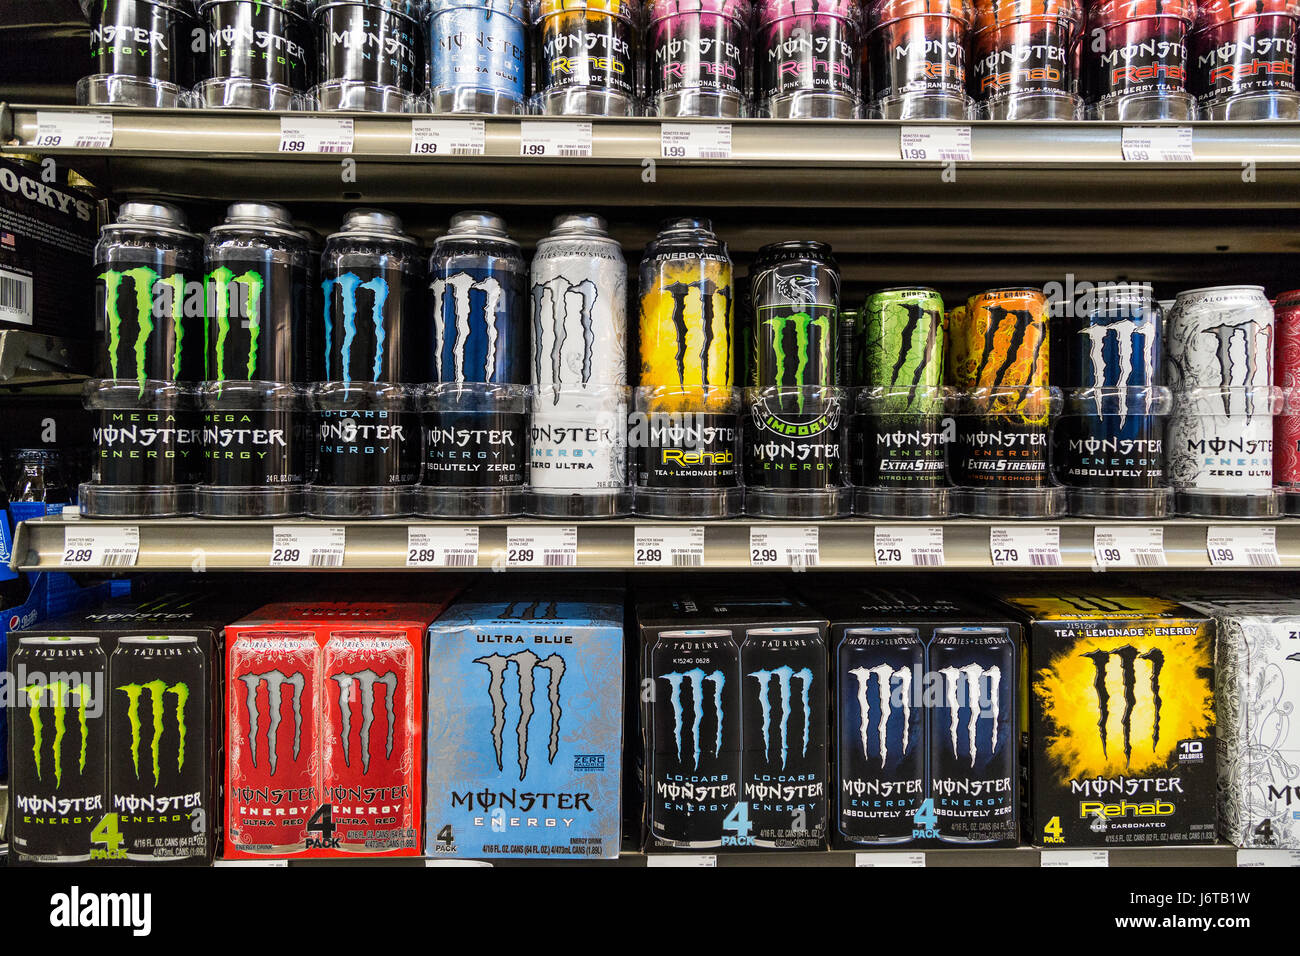 A display of Monster energy drinks cans on the shelves of a grocery store  Stock Photo - Alamy